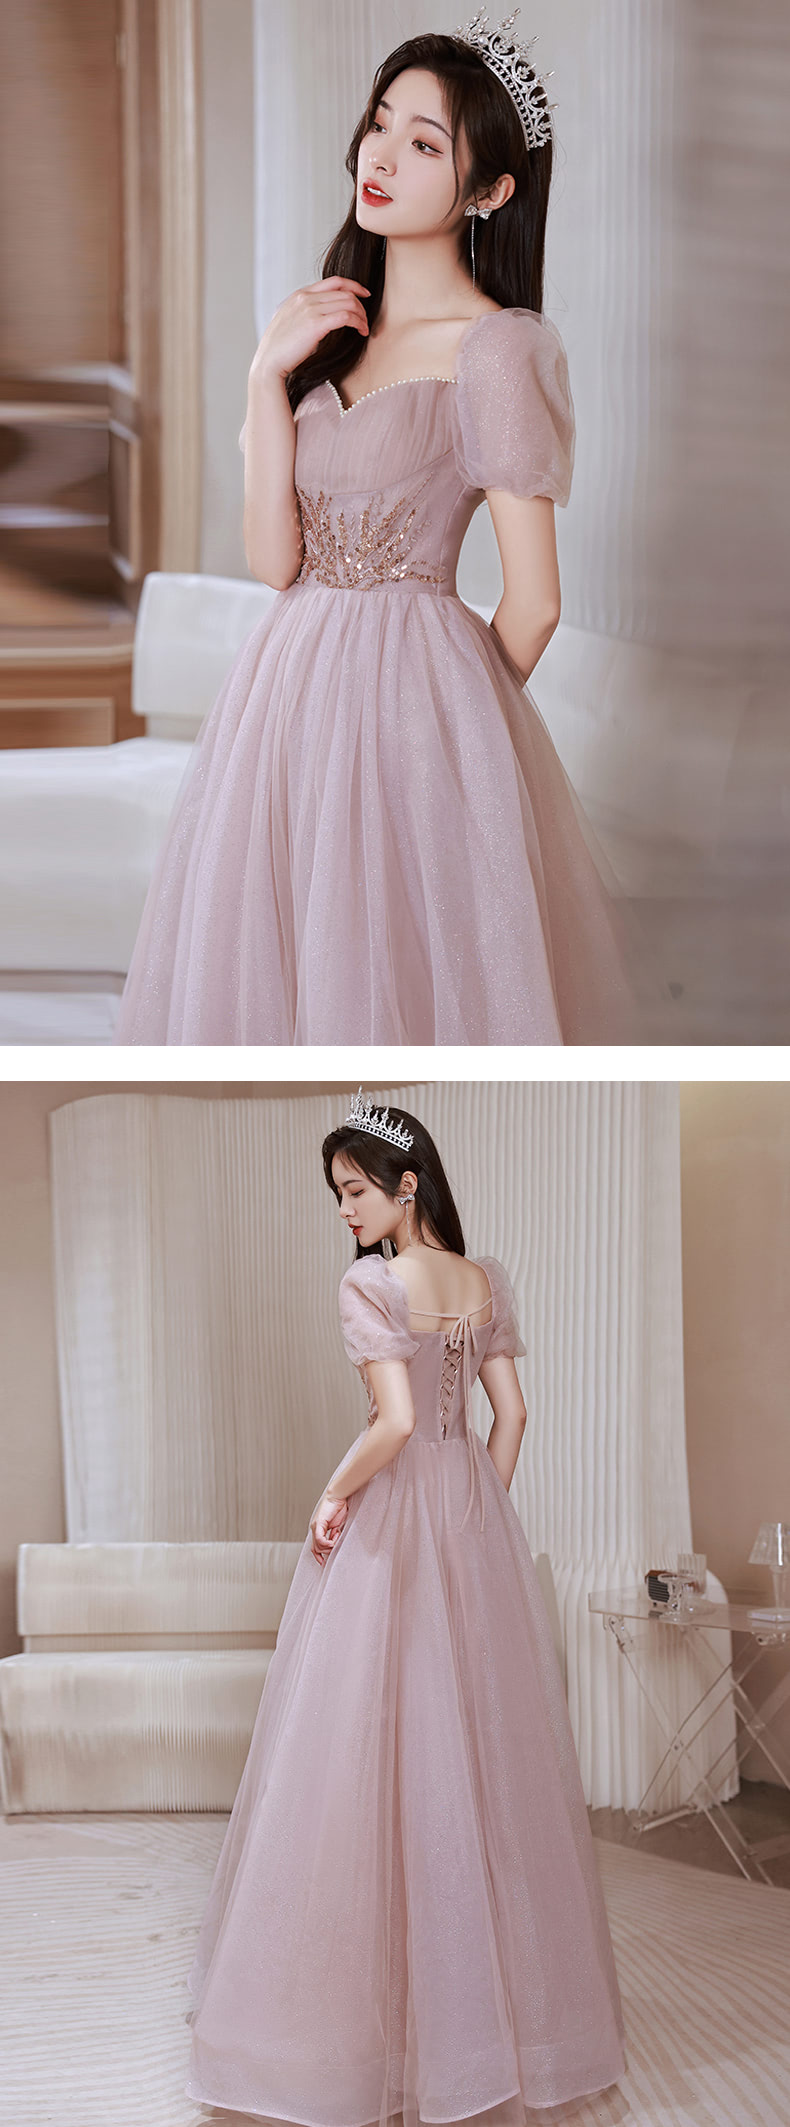 A-Line-Simple-Pink-Tulle-Graduation-Homecoming-Prom-Party-Dress17.jpg